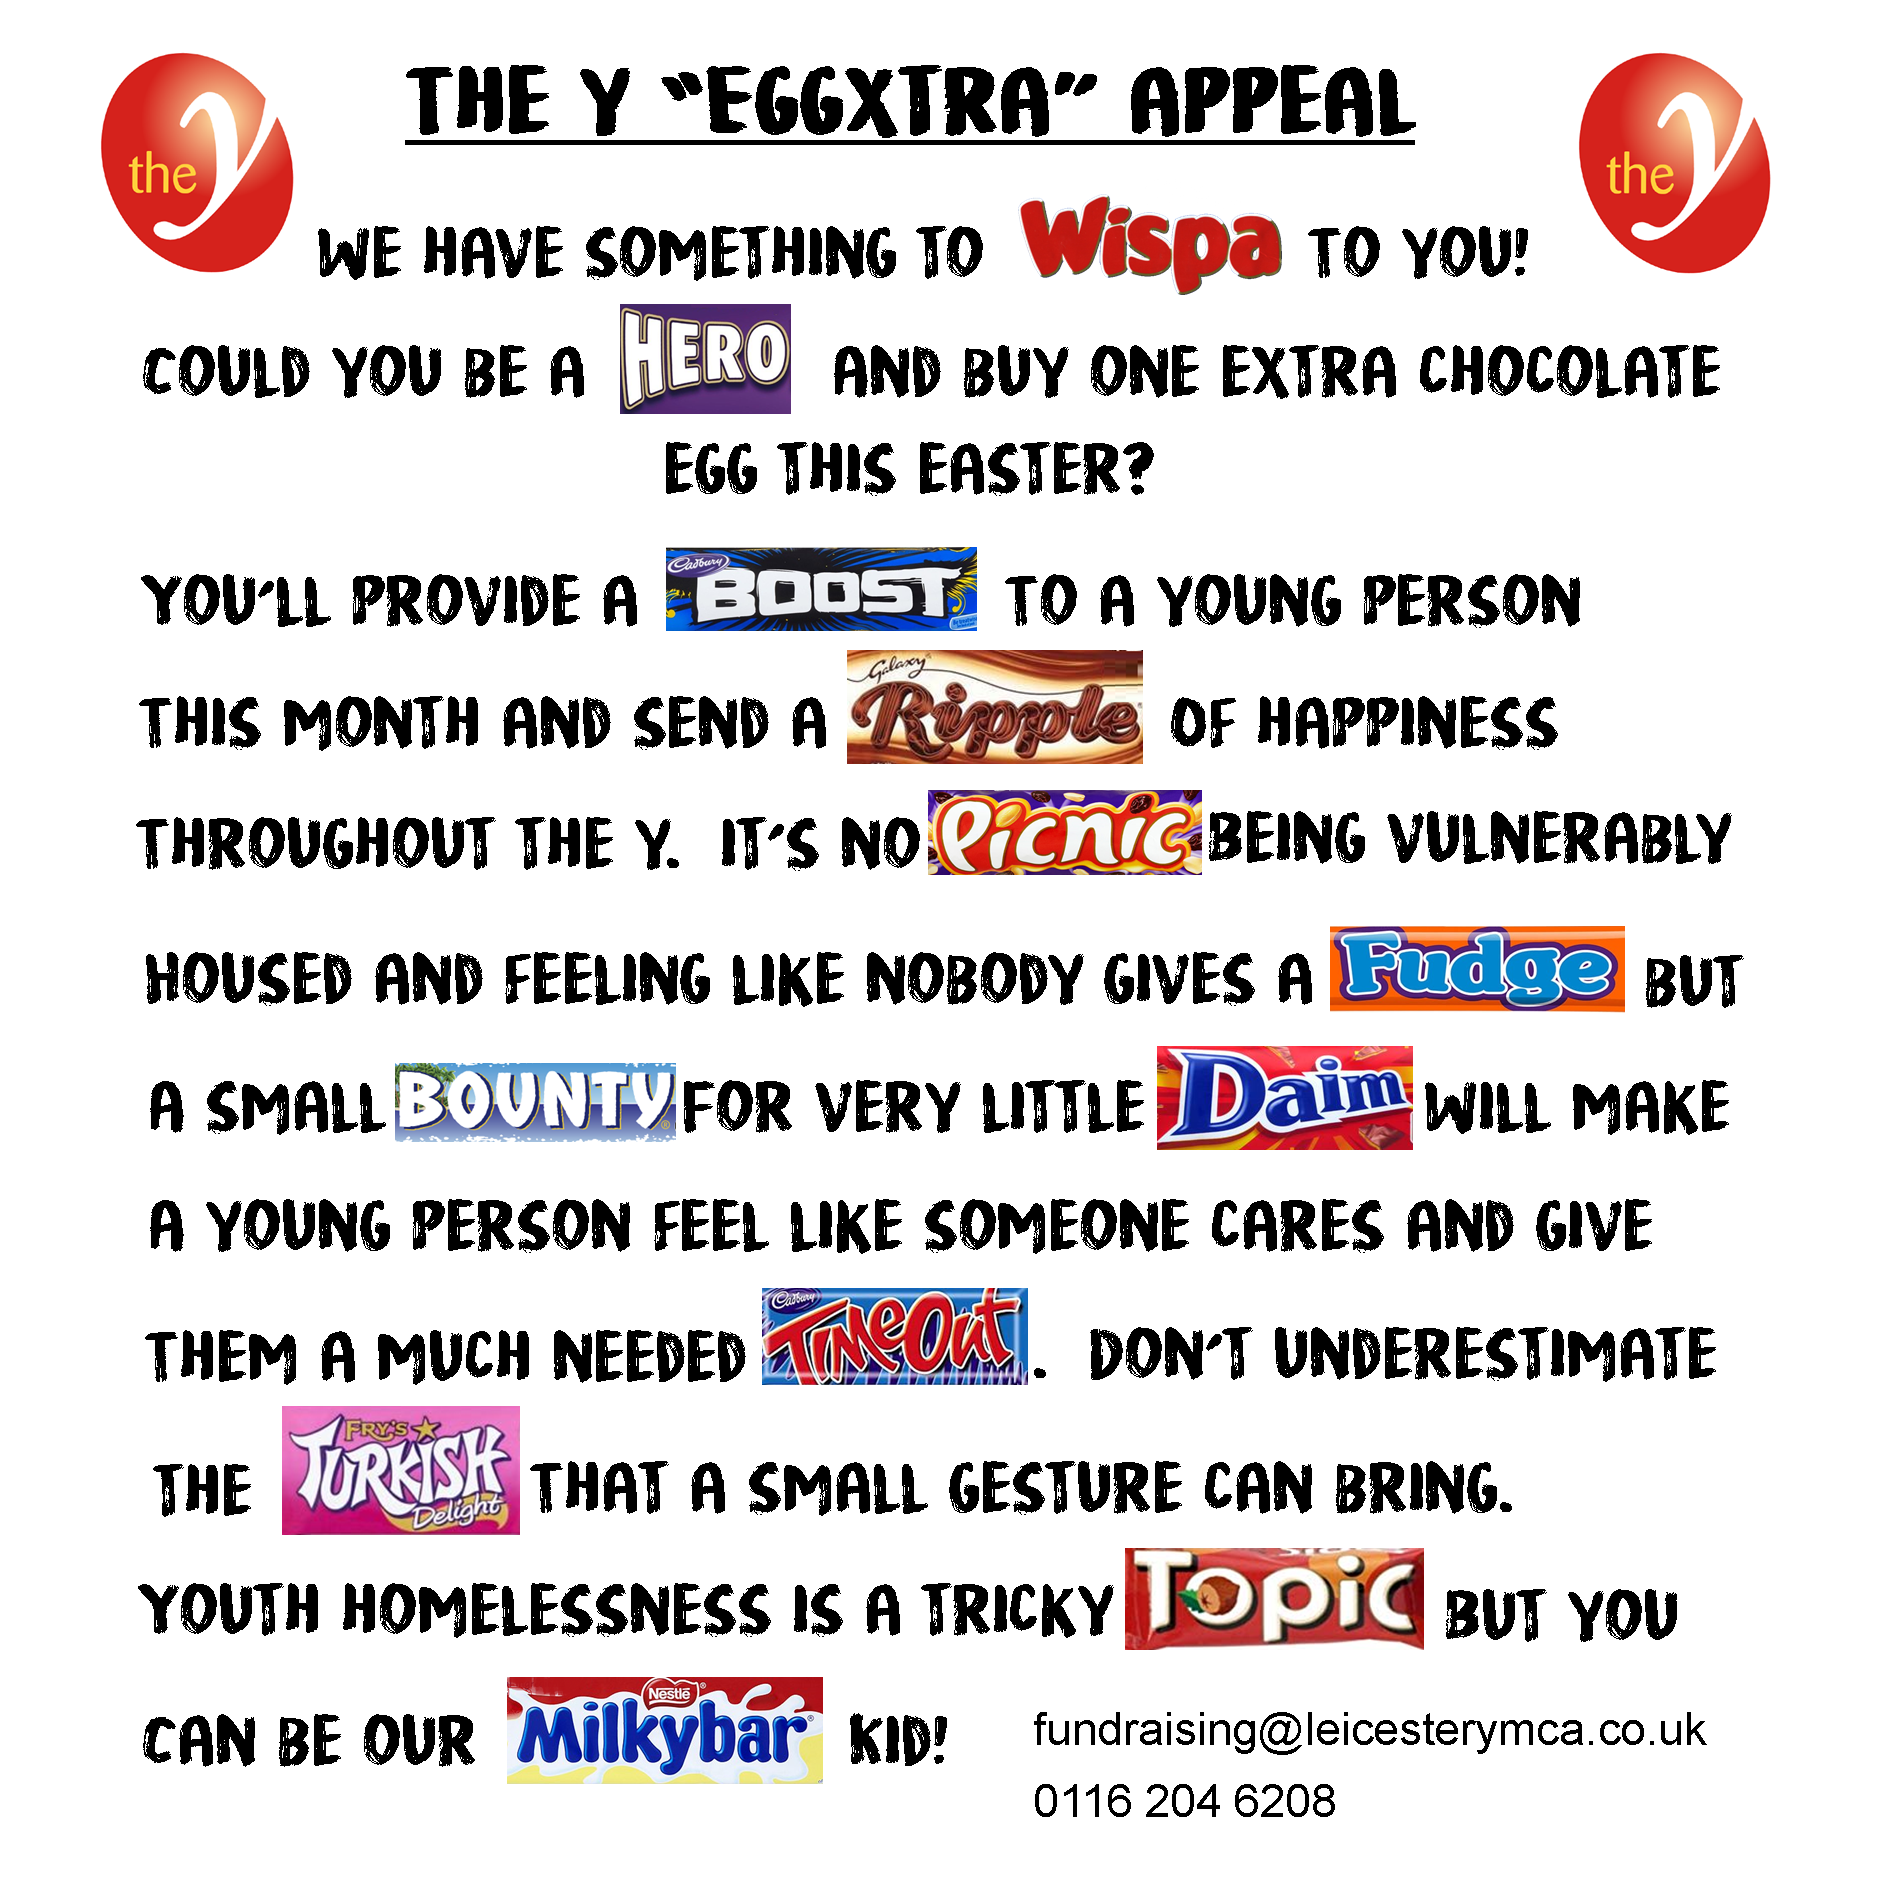 The Y “Eggxtra” Appeal